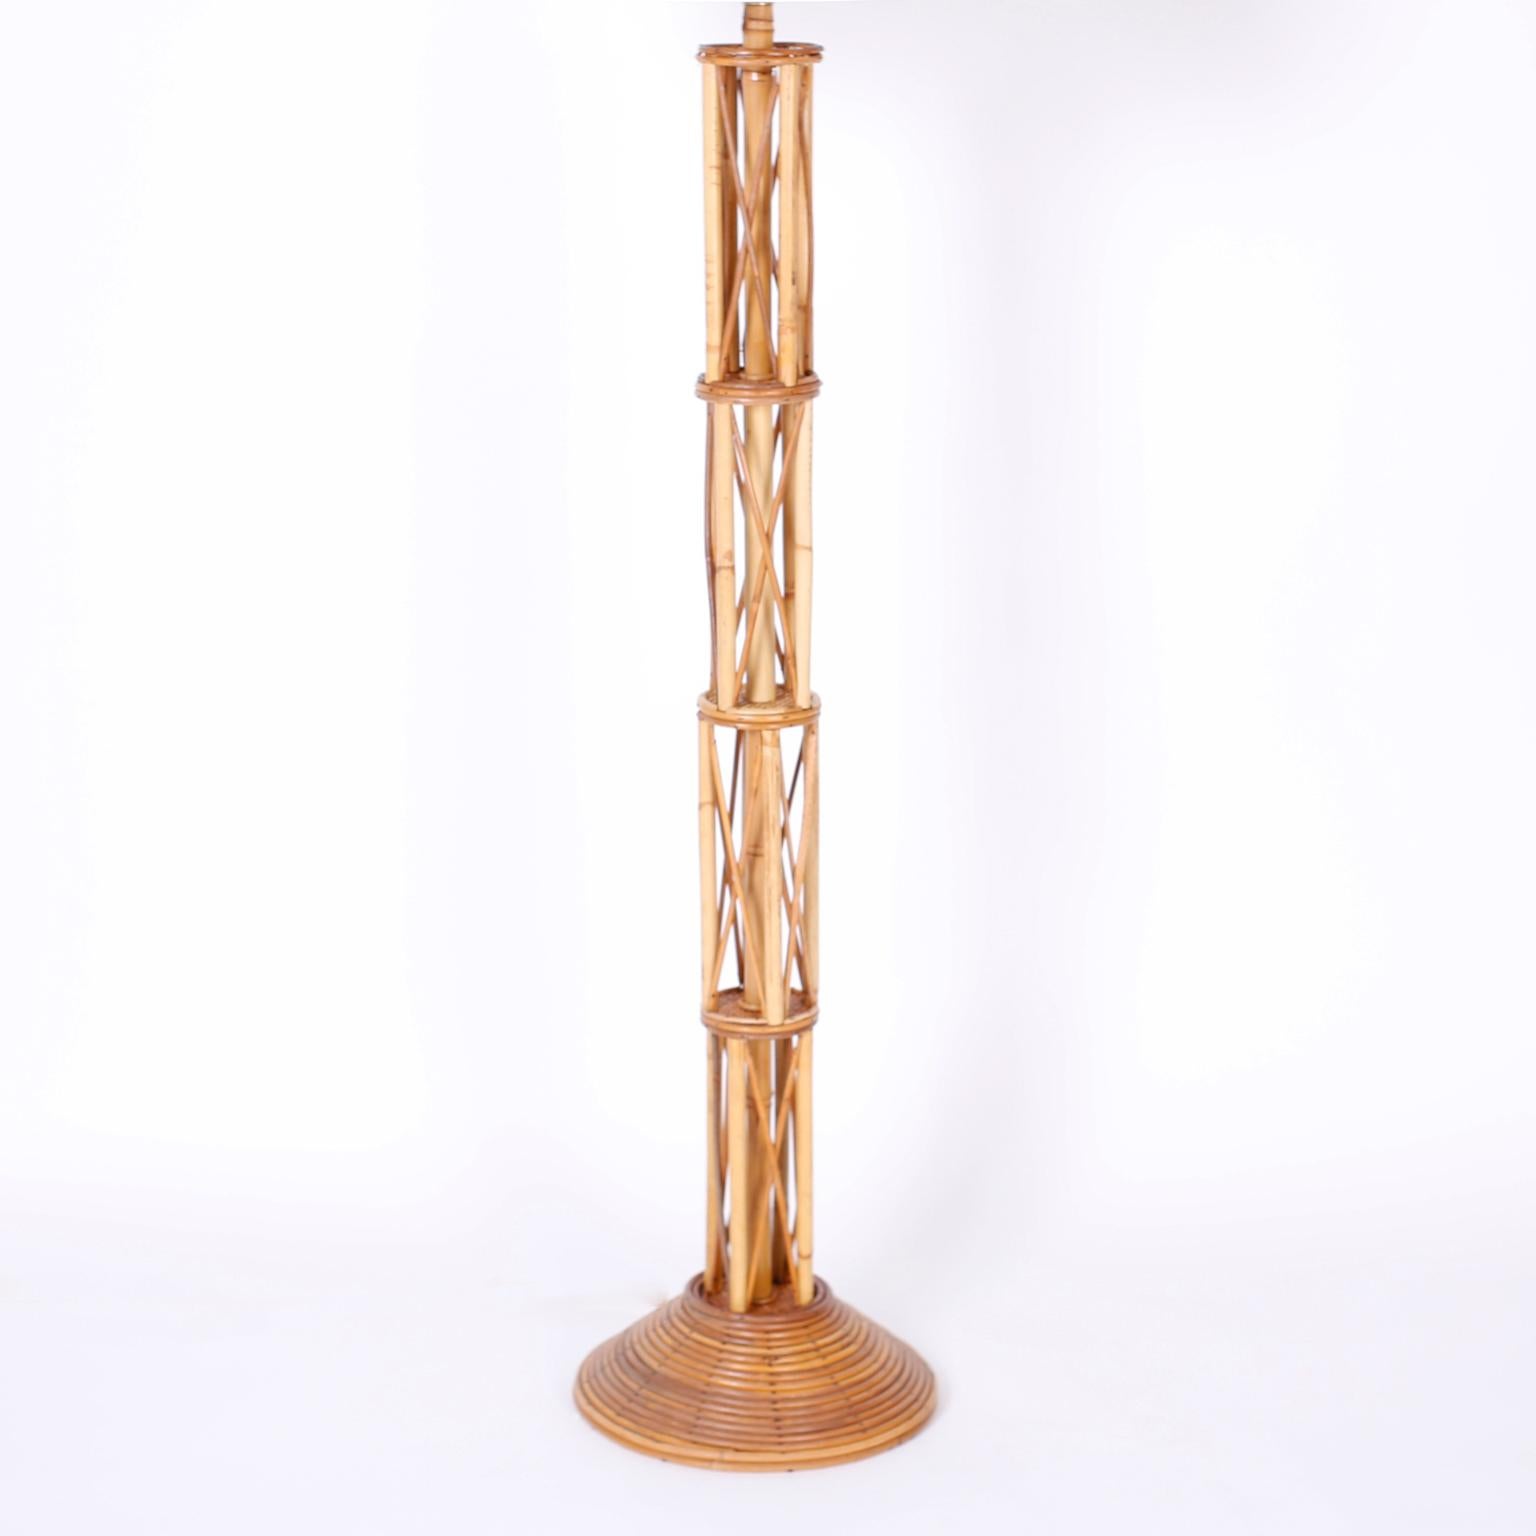 Mid century floor lamp crafted in bamboo and rattan, with four levels bamboo and crossed rattan, divided by grasscloth discs on a round rattan base.